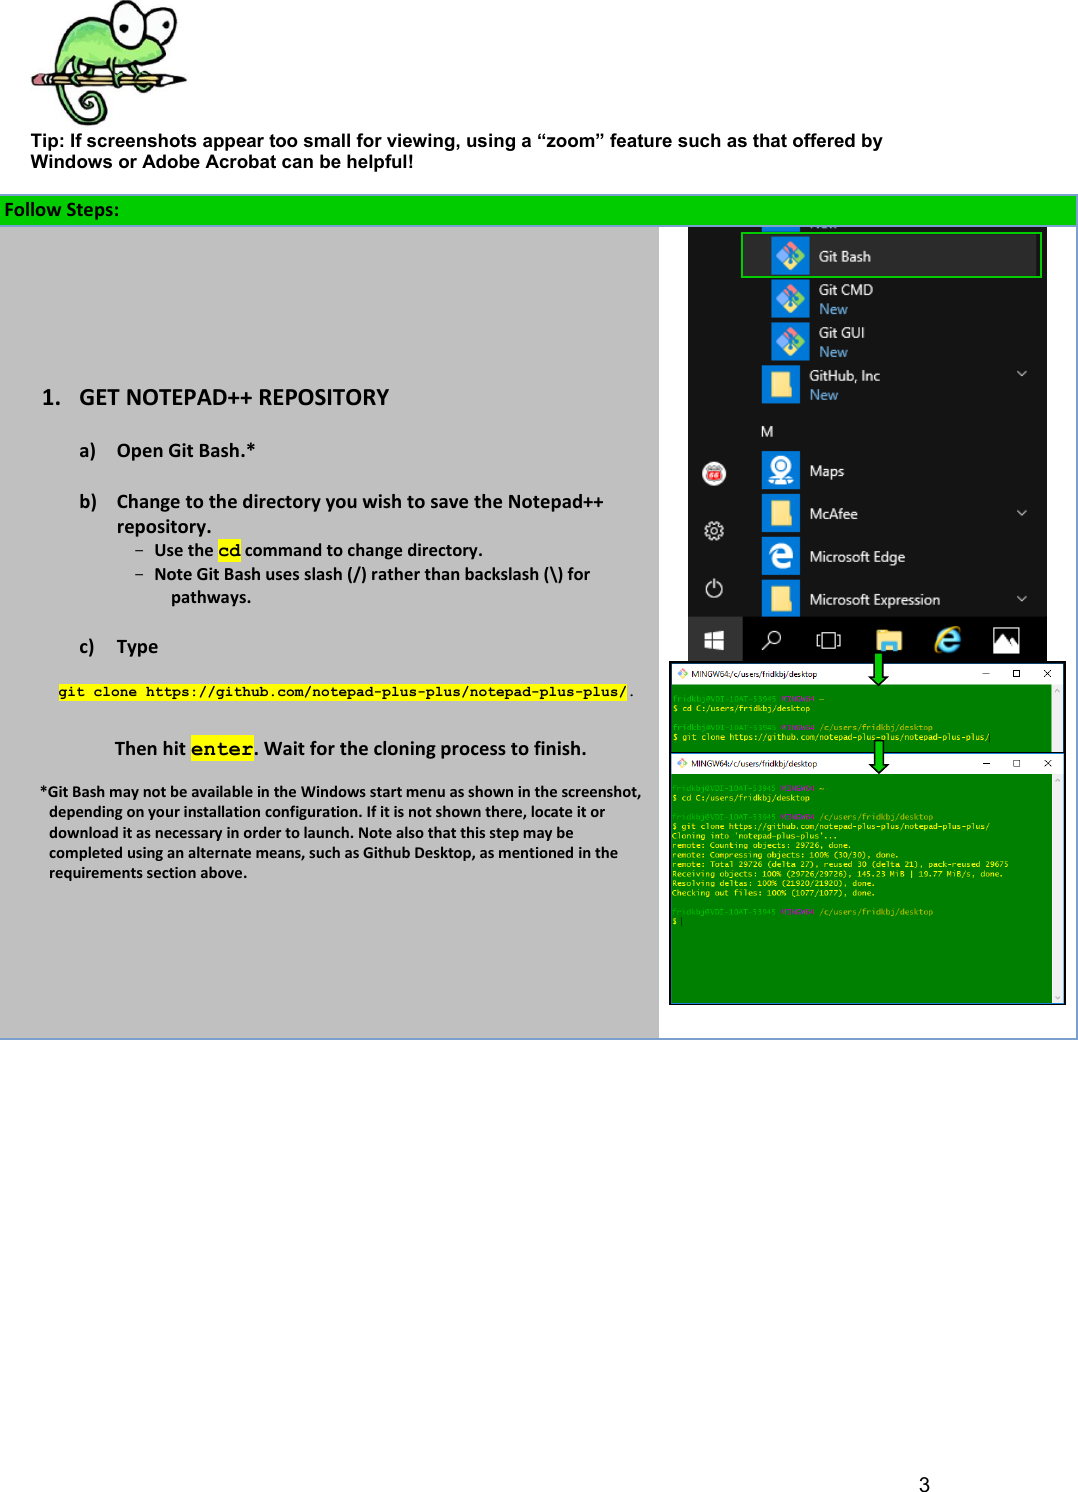 Page 3 of 10 - Building Notepad++ From Source - A Beginners Guide